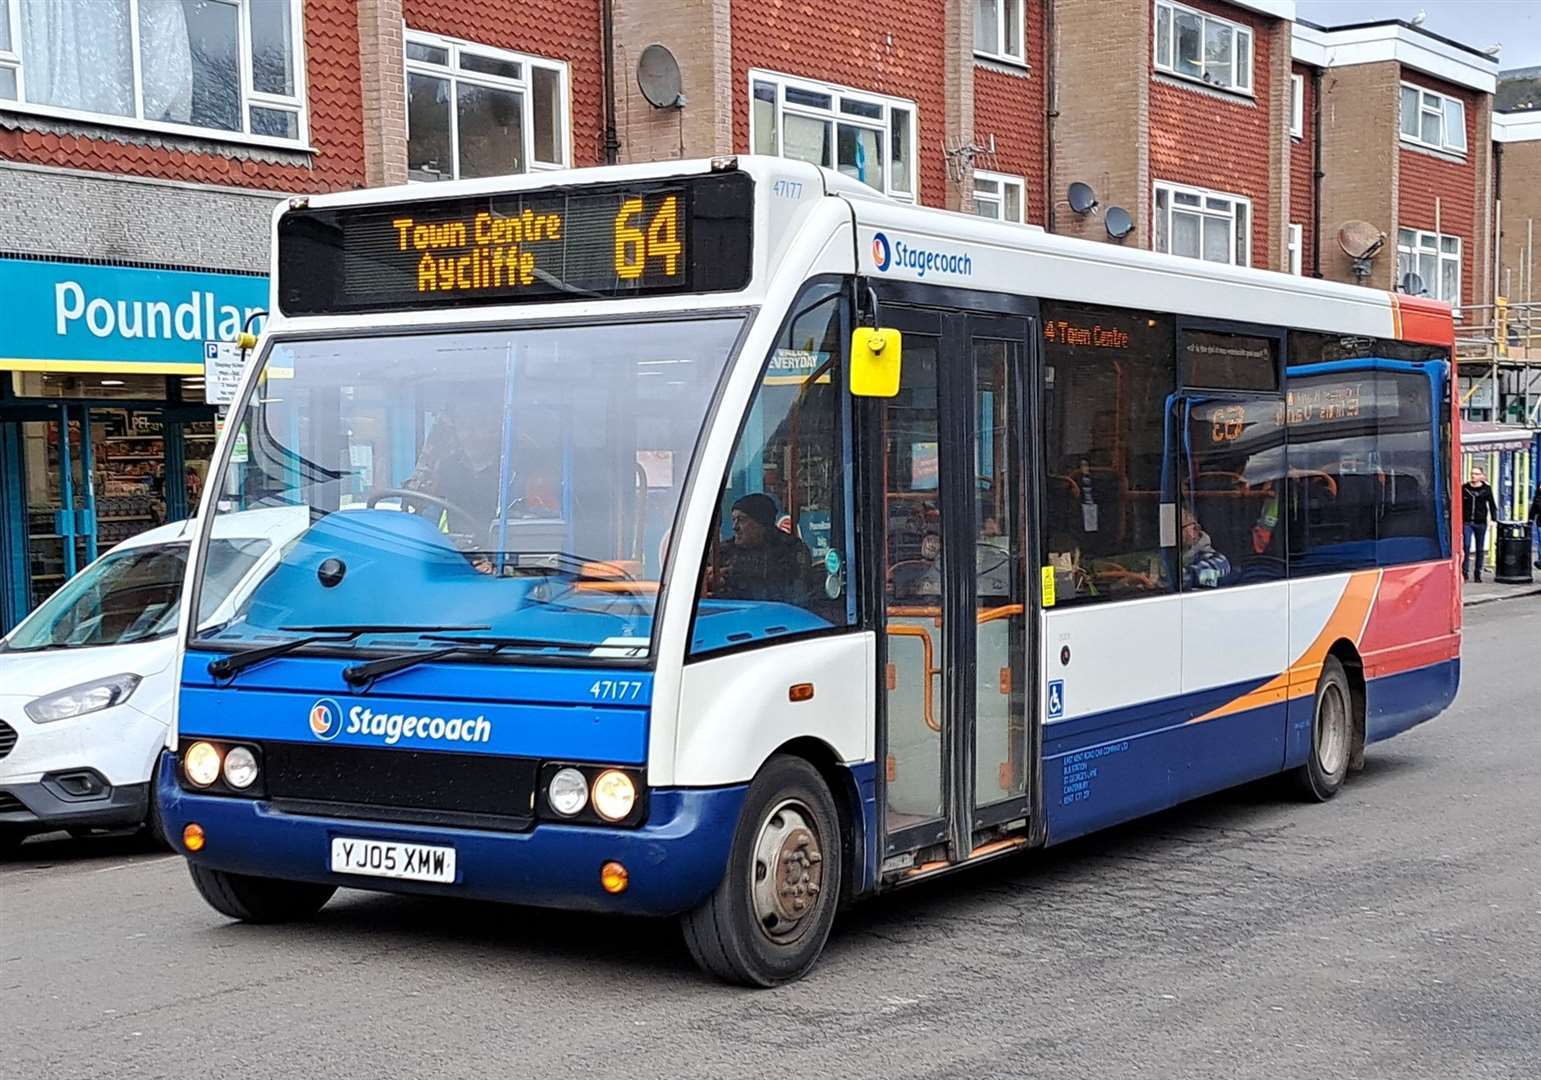 The 64 service for Aycliffe now ends early in the evening